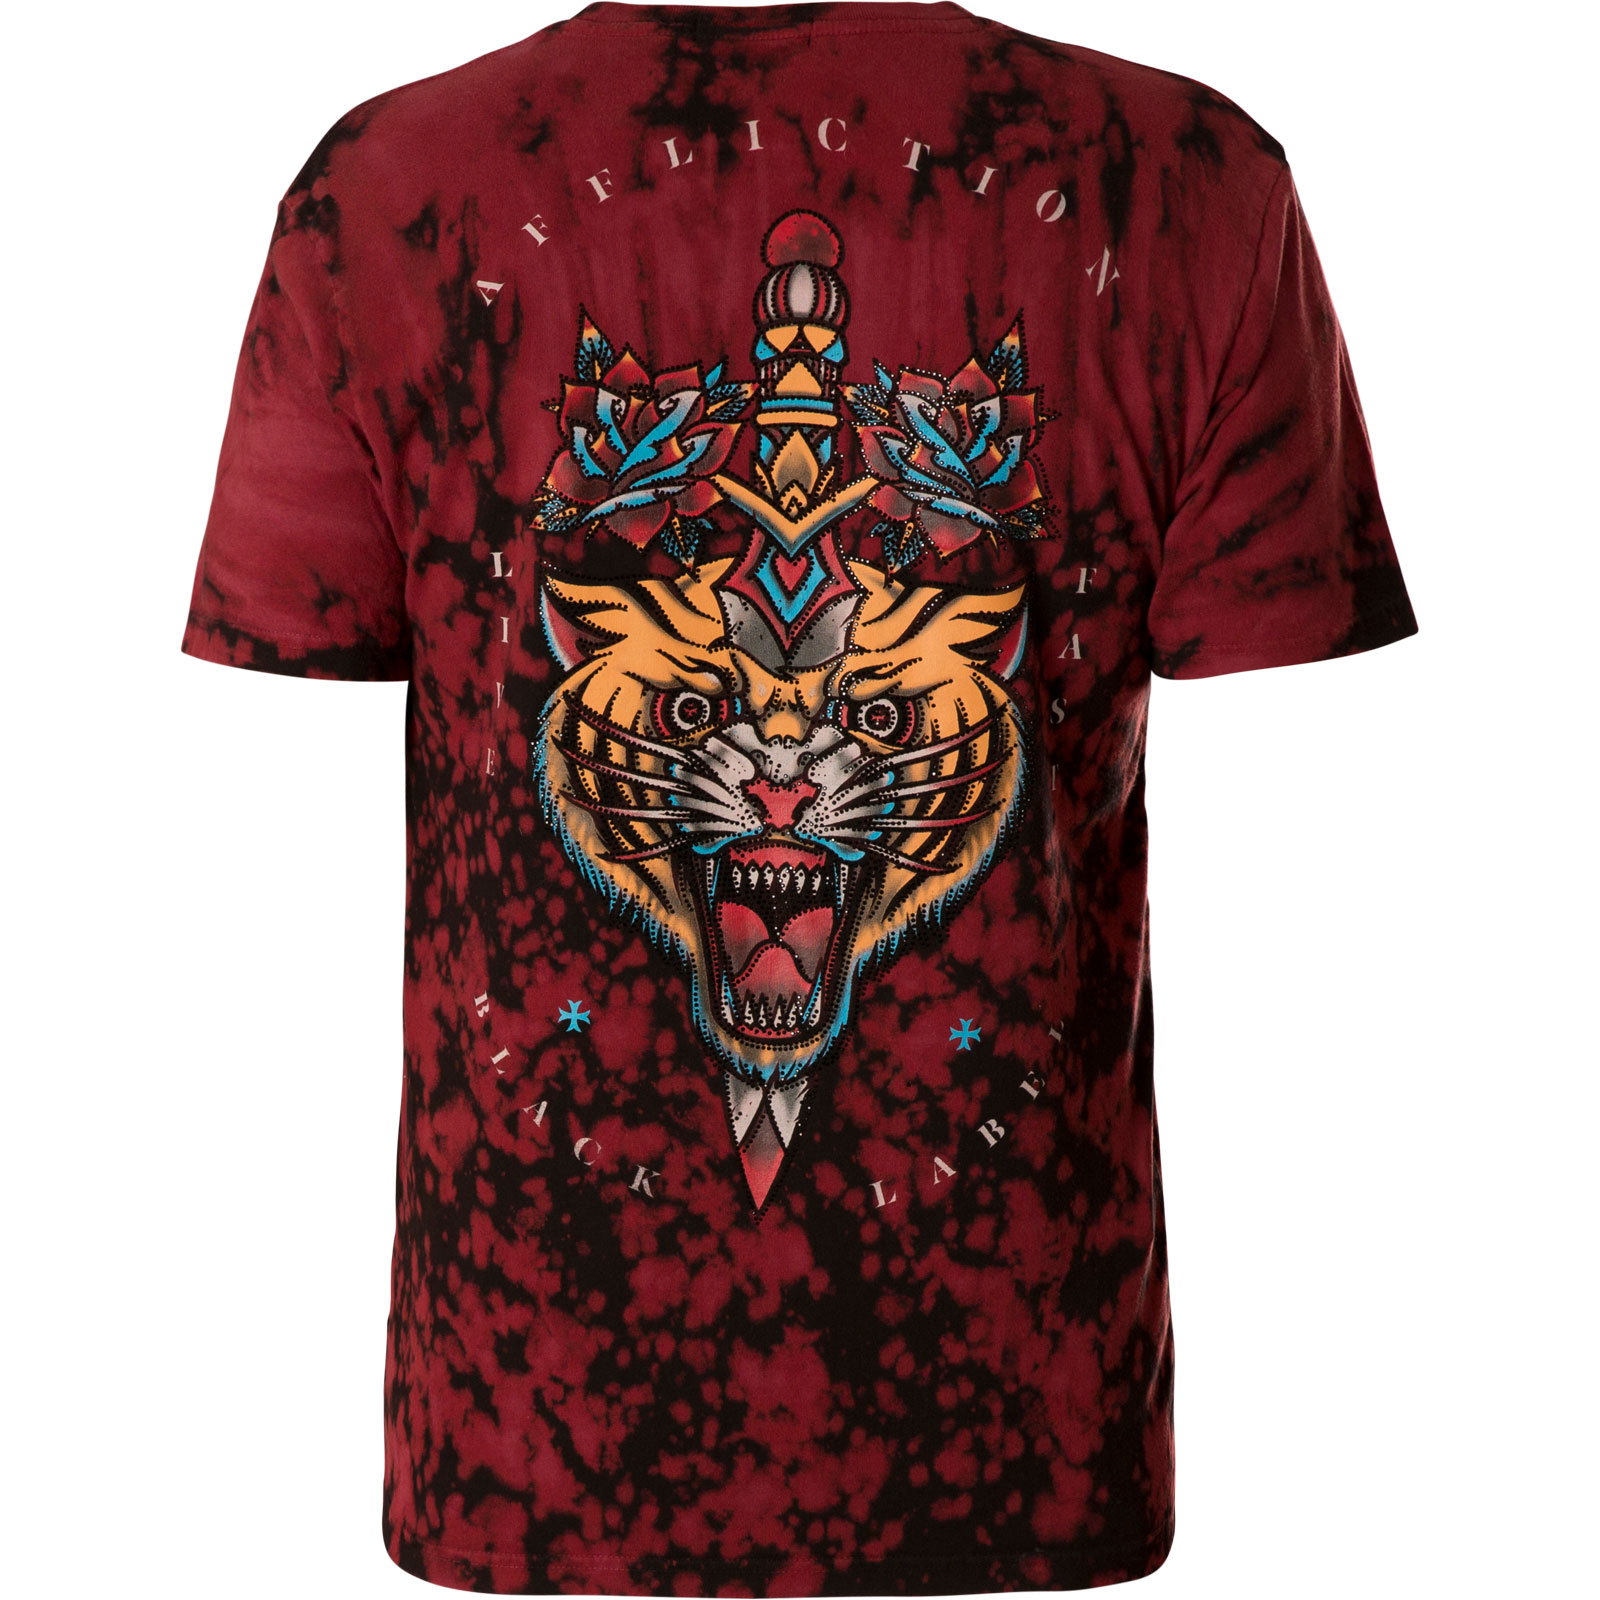 Affliction Sreaming Dagger T-Shirt Print featuring tiger head and flower